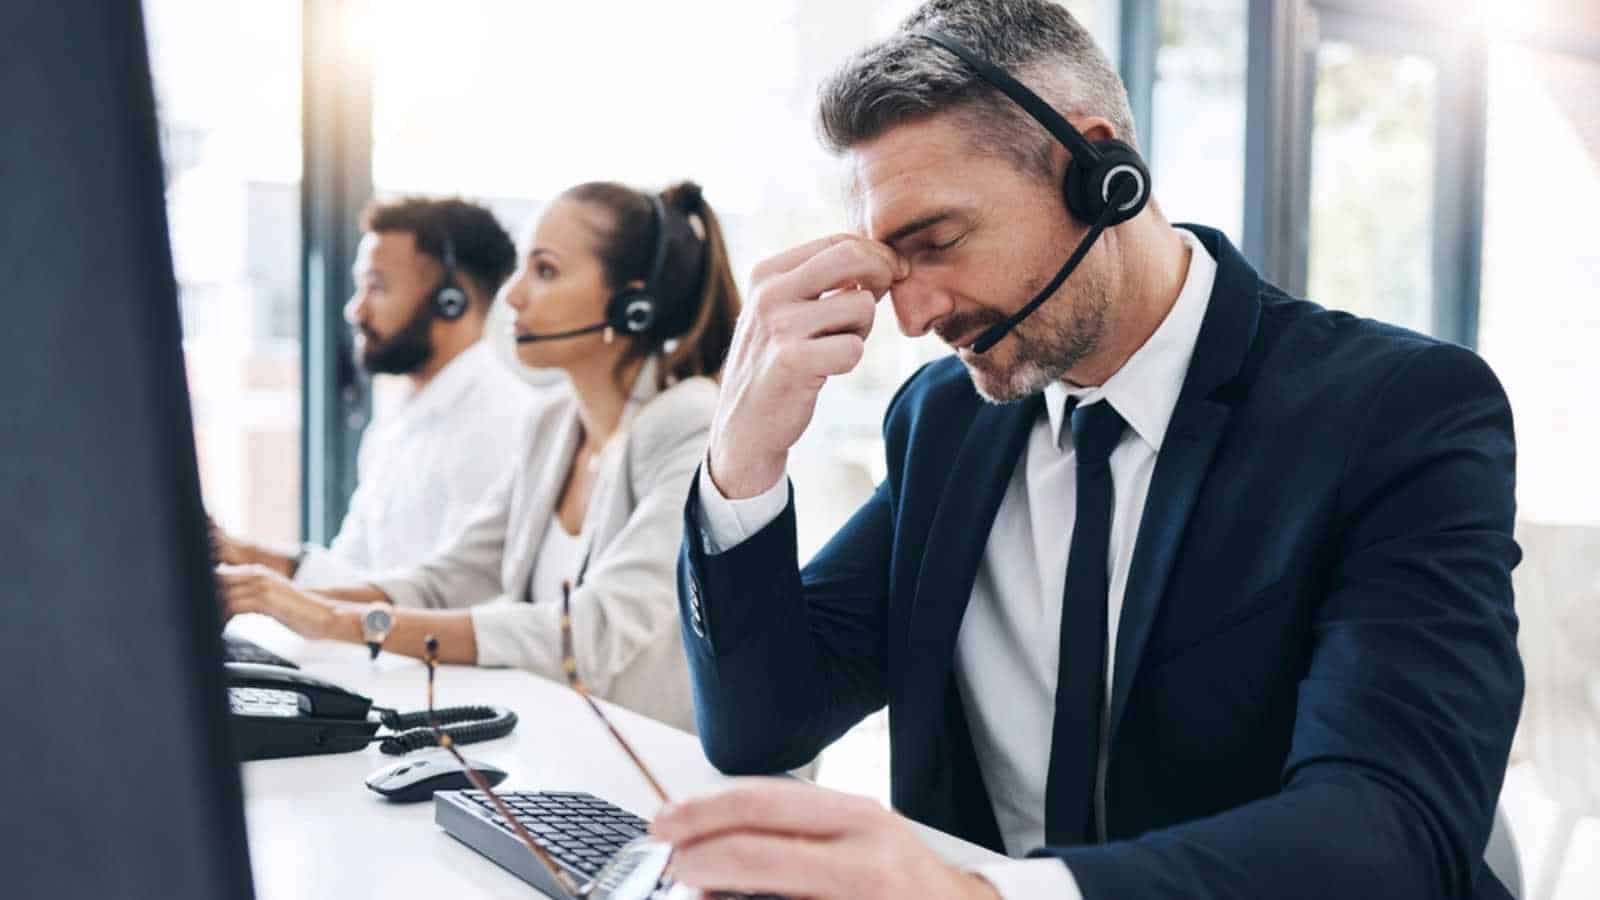 Man with headphones stressed at work